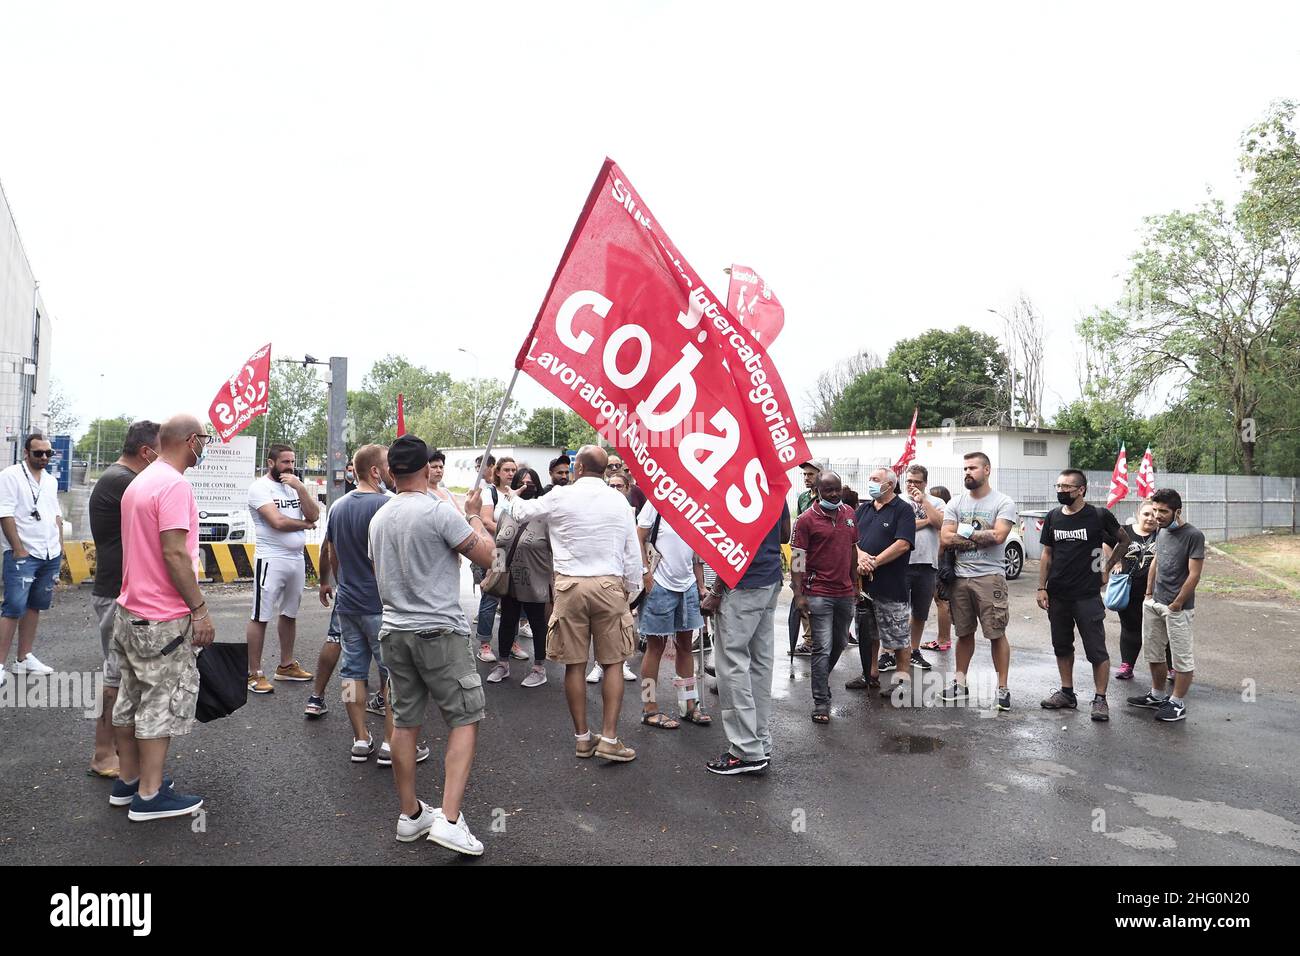 Michele Nucci/LaPresse August 2, 2021 - Bologna, ItalyNews Workers fired with a message on Whatsappin the pic: workers protest of the &quot;Logista&quot; firm Stock Photo